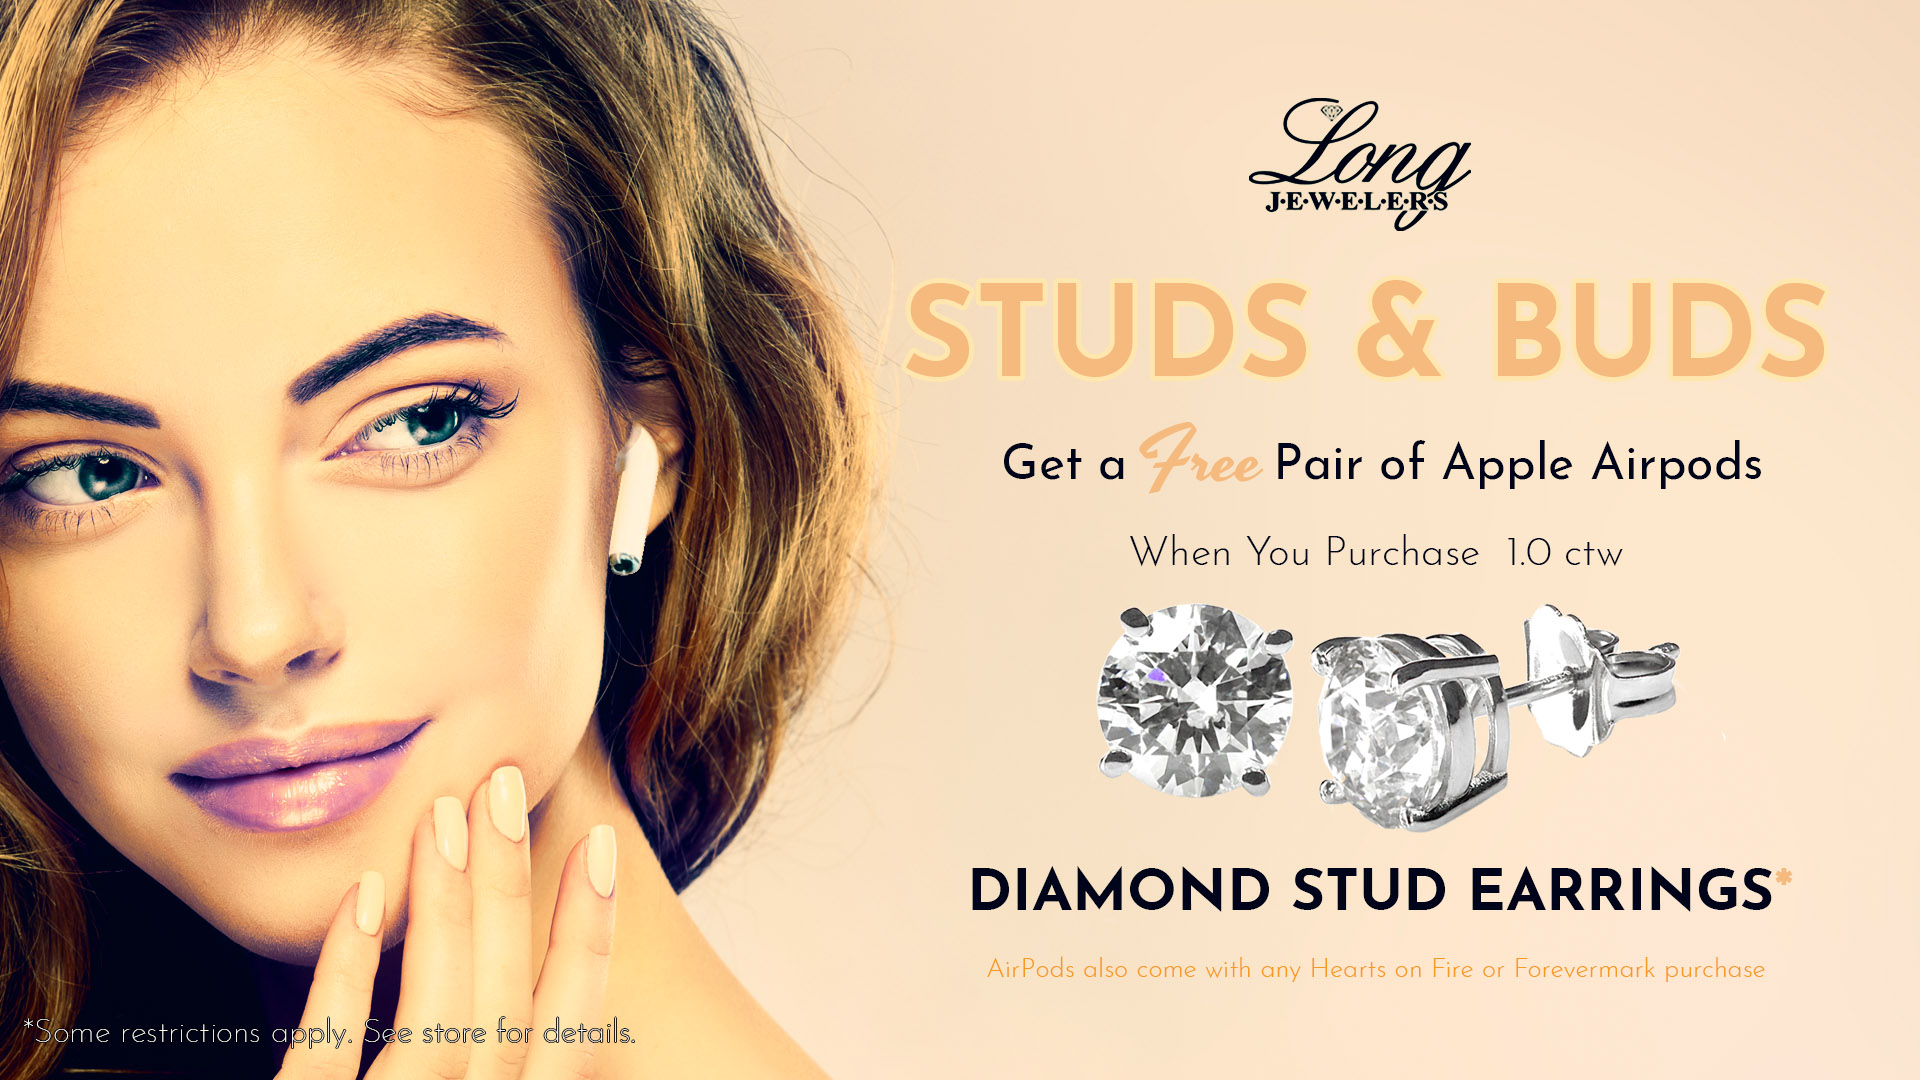 Studs & Buds Promotion - Get a Free Pair of Air Pods